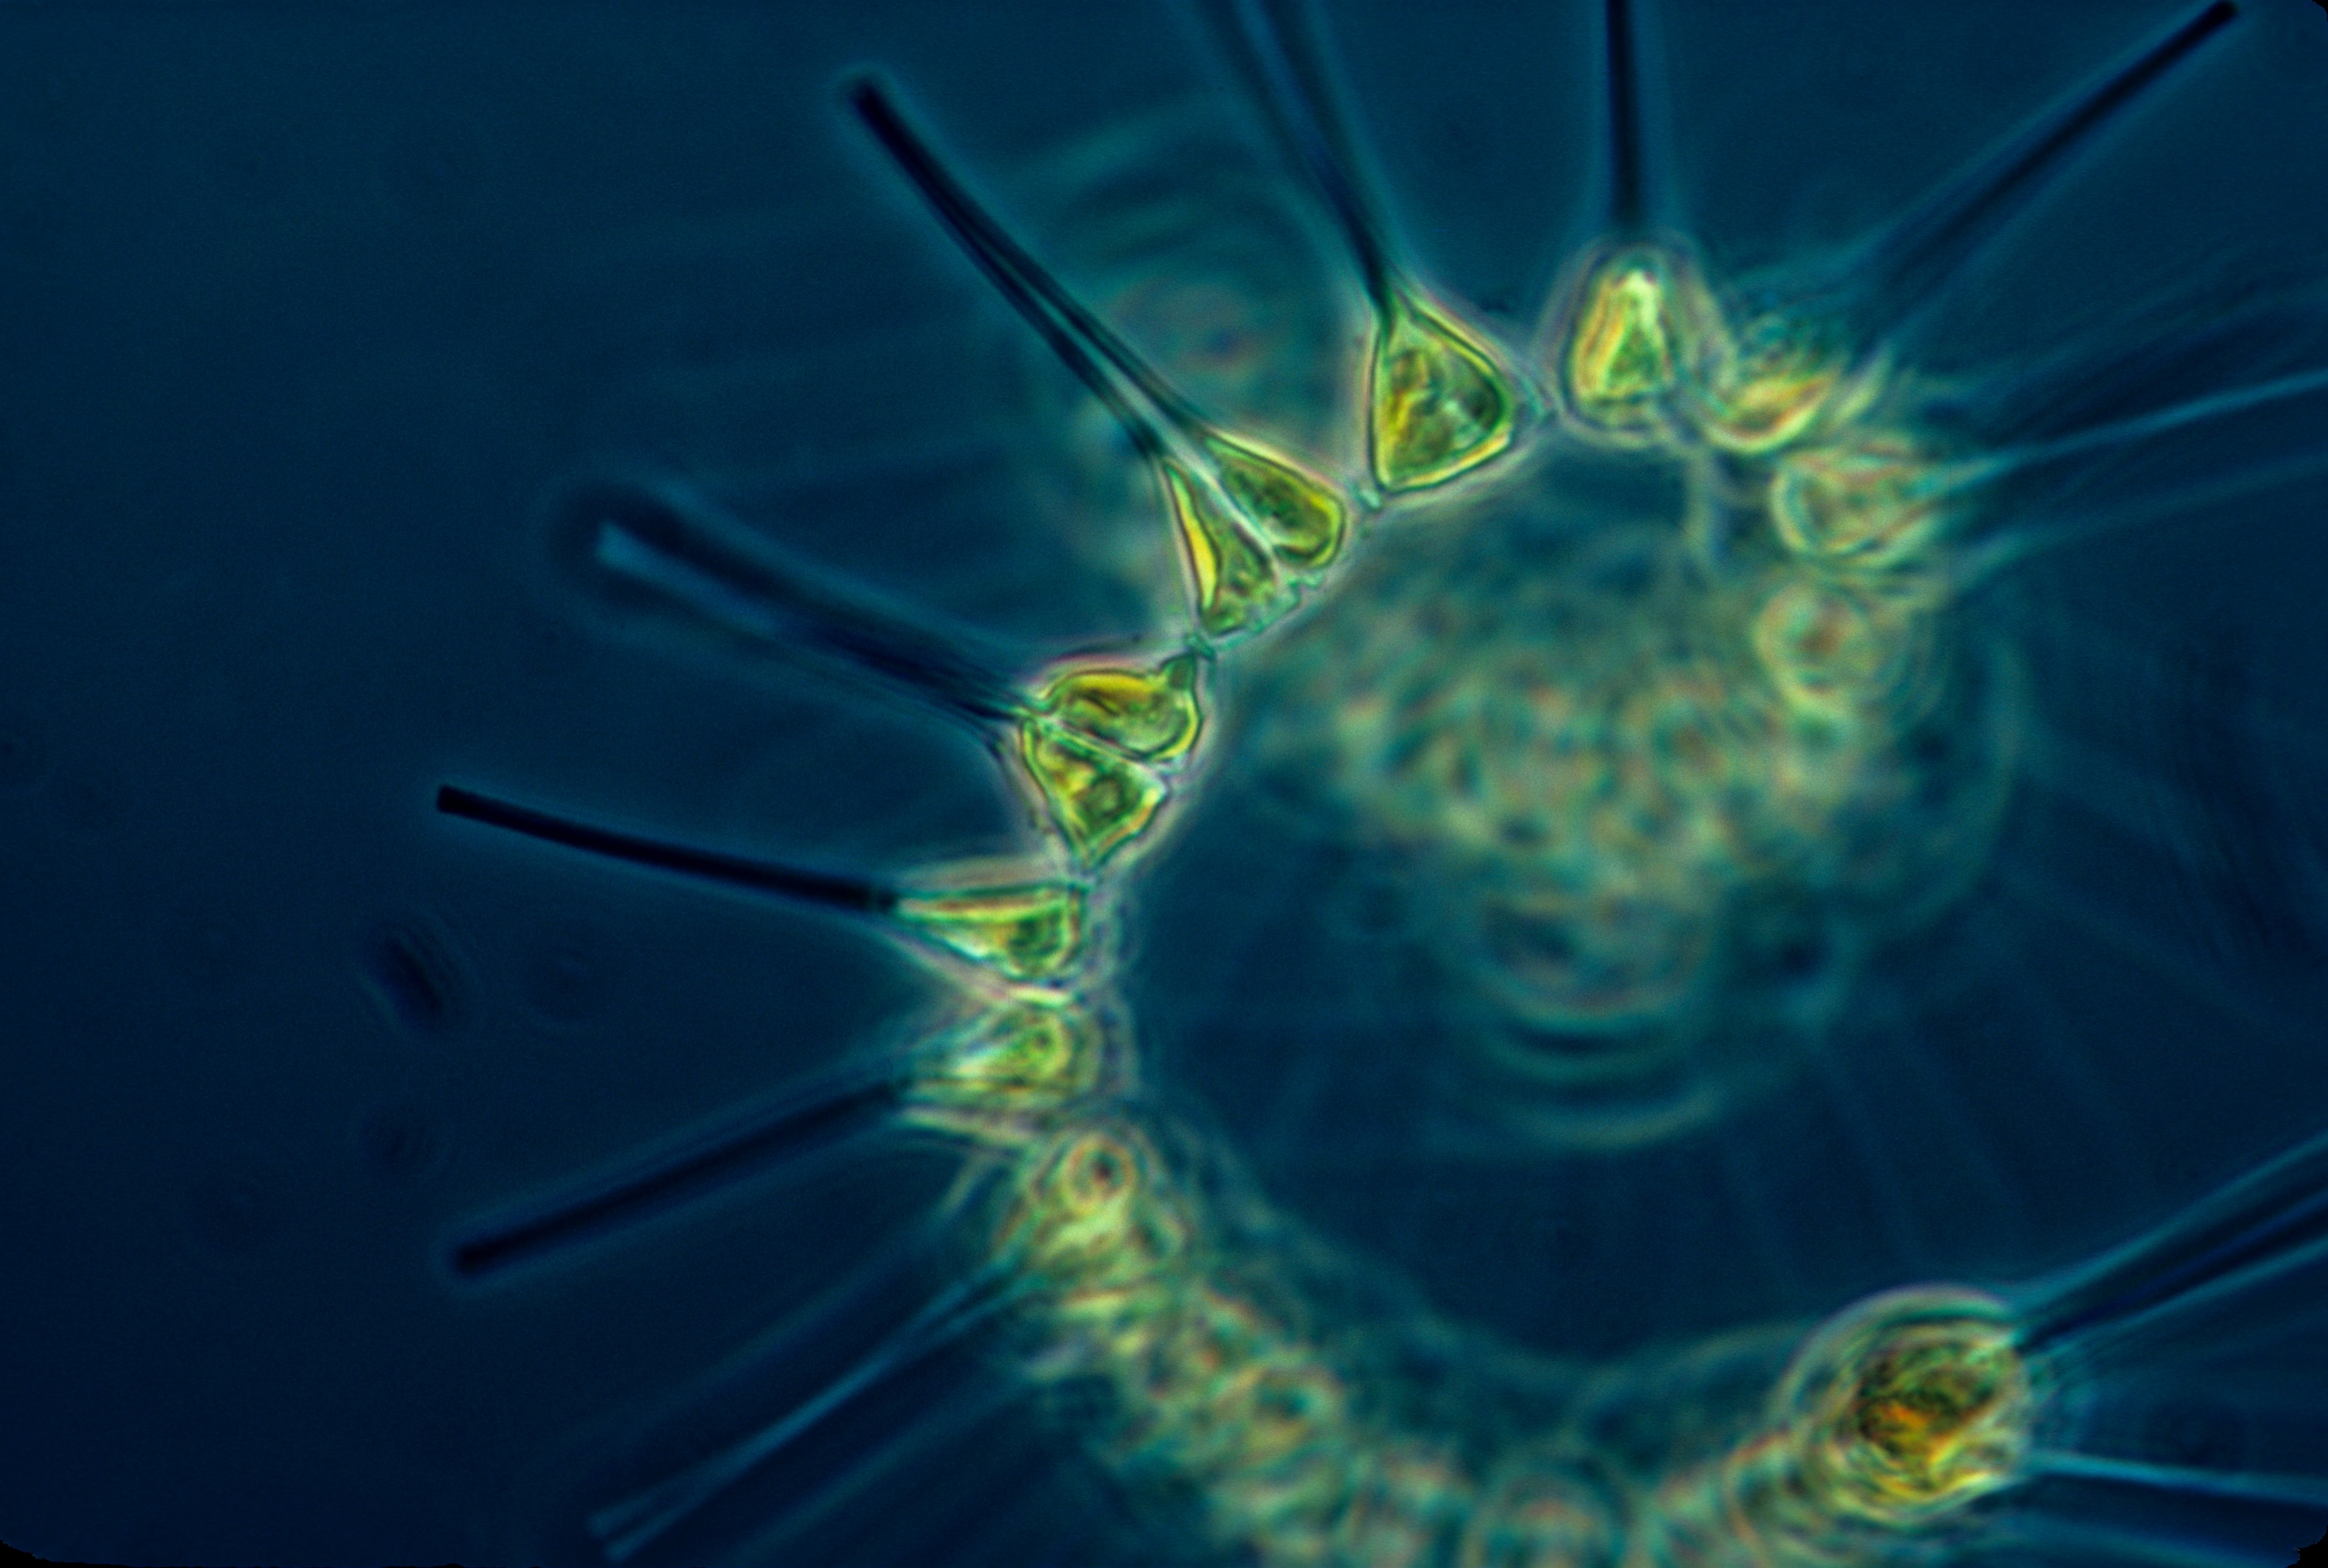 Culturing and microscopy techniques for the analysis of phytoplankton diversity